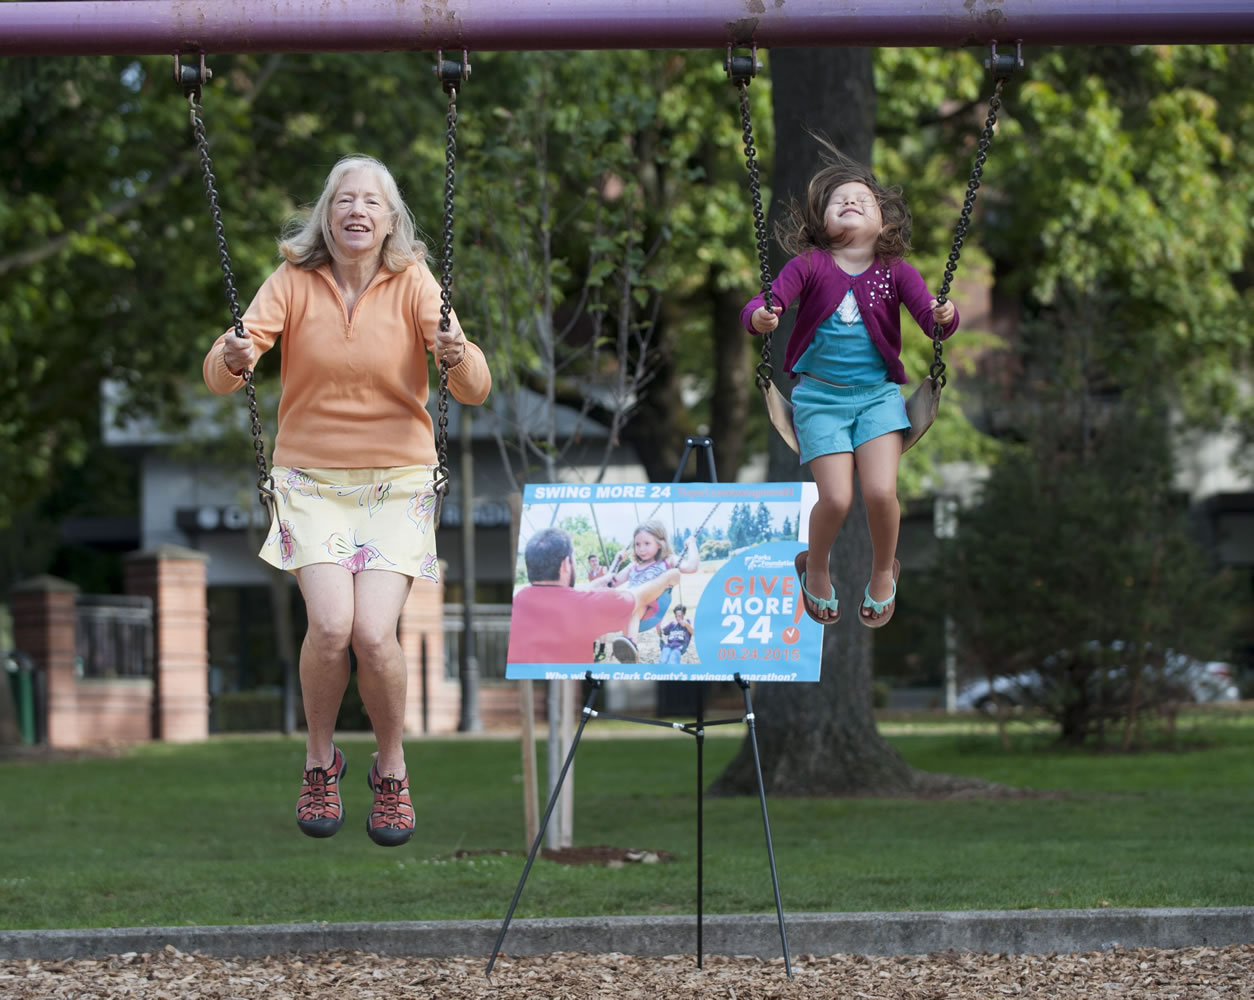 Jane Van Dyke, left, takes part in Give More 24! in a swinging marathon while Maxine Born-Bullock swings nearby in Vancouver on Thursday. The event is Clark County's annual 24-hour online giving competition, in which nonprofits encourage giving throughout the day with parties and promotions.